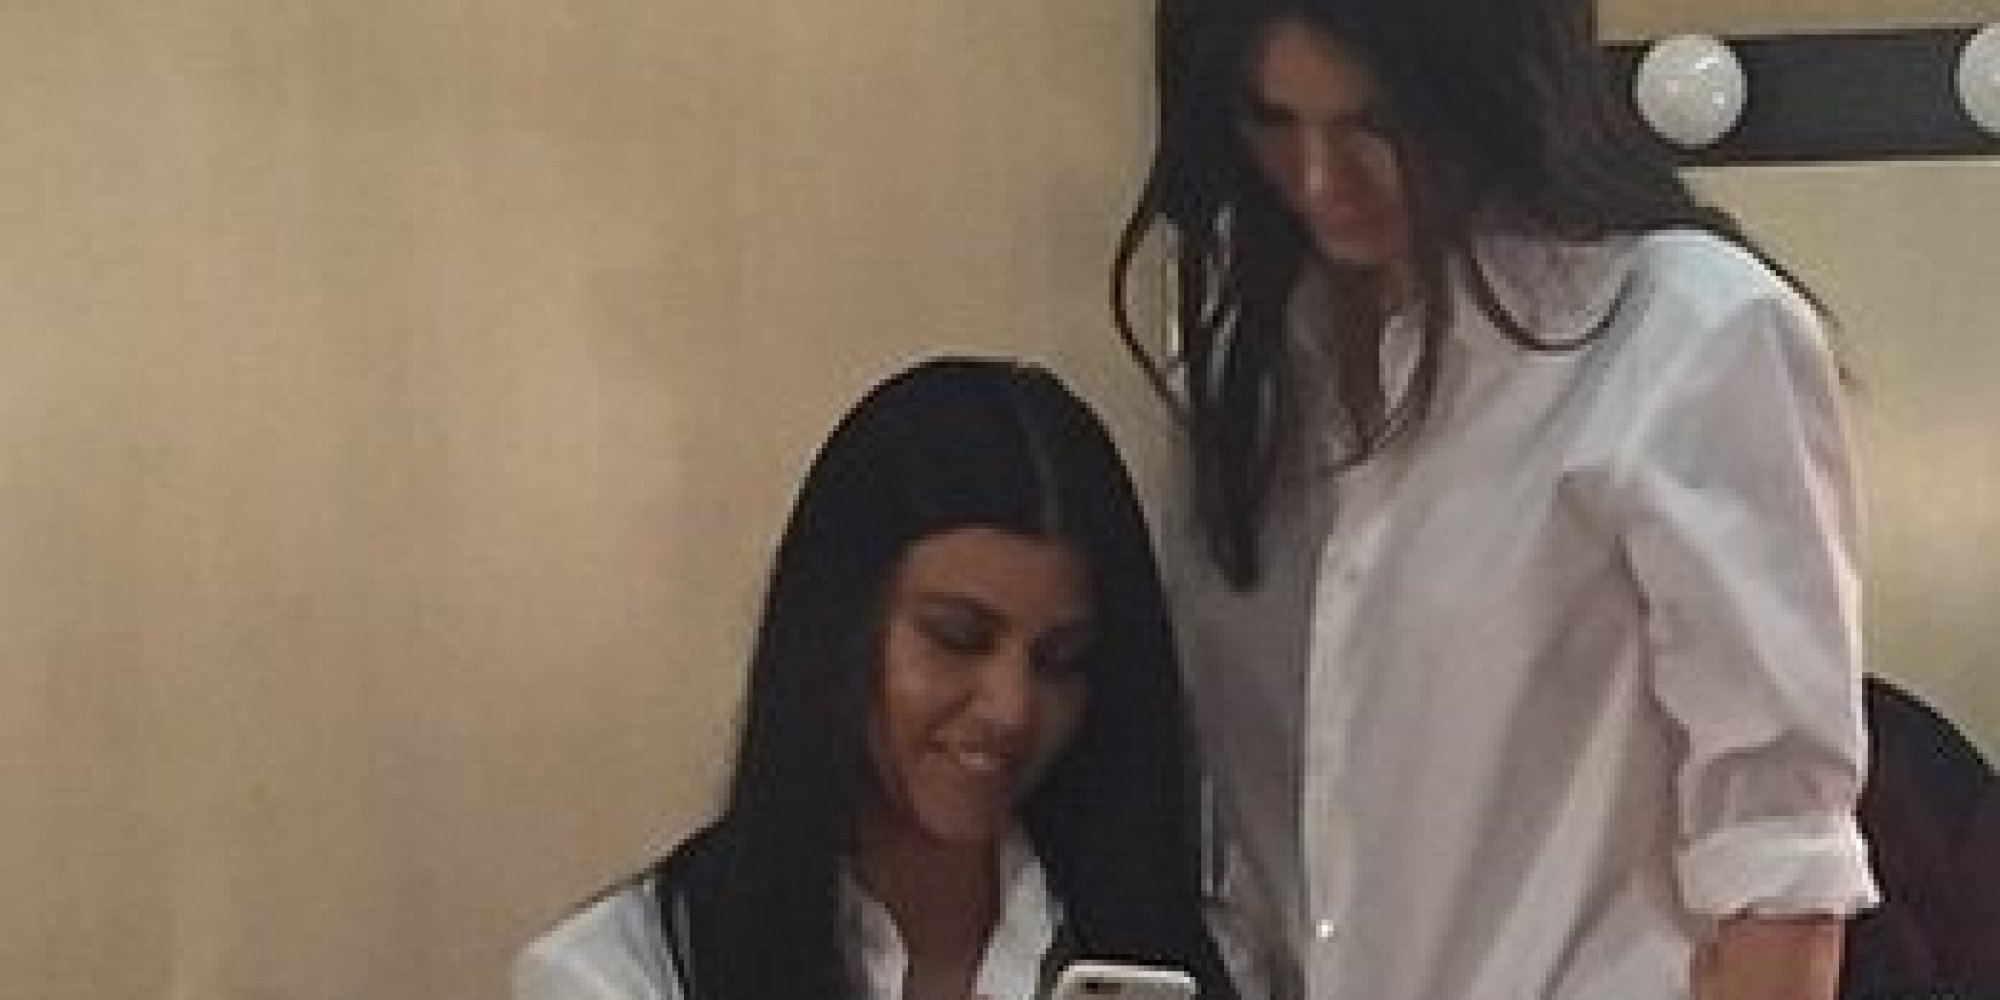 Kendall Jenner And Kourtney Kardashian Have Quite The Height Difference